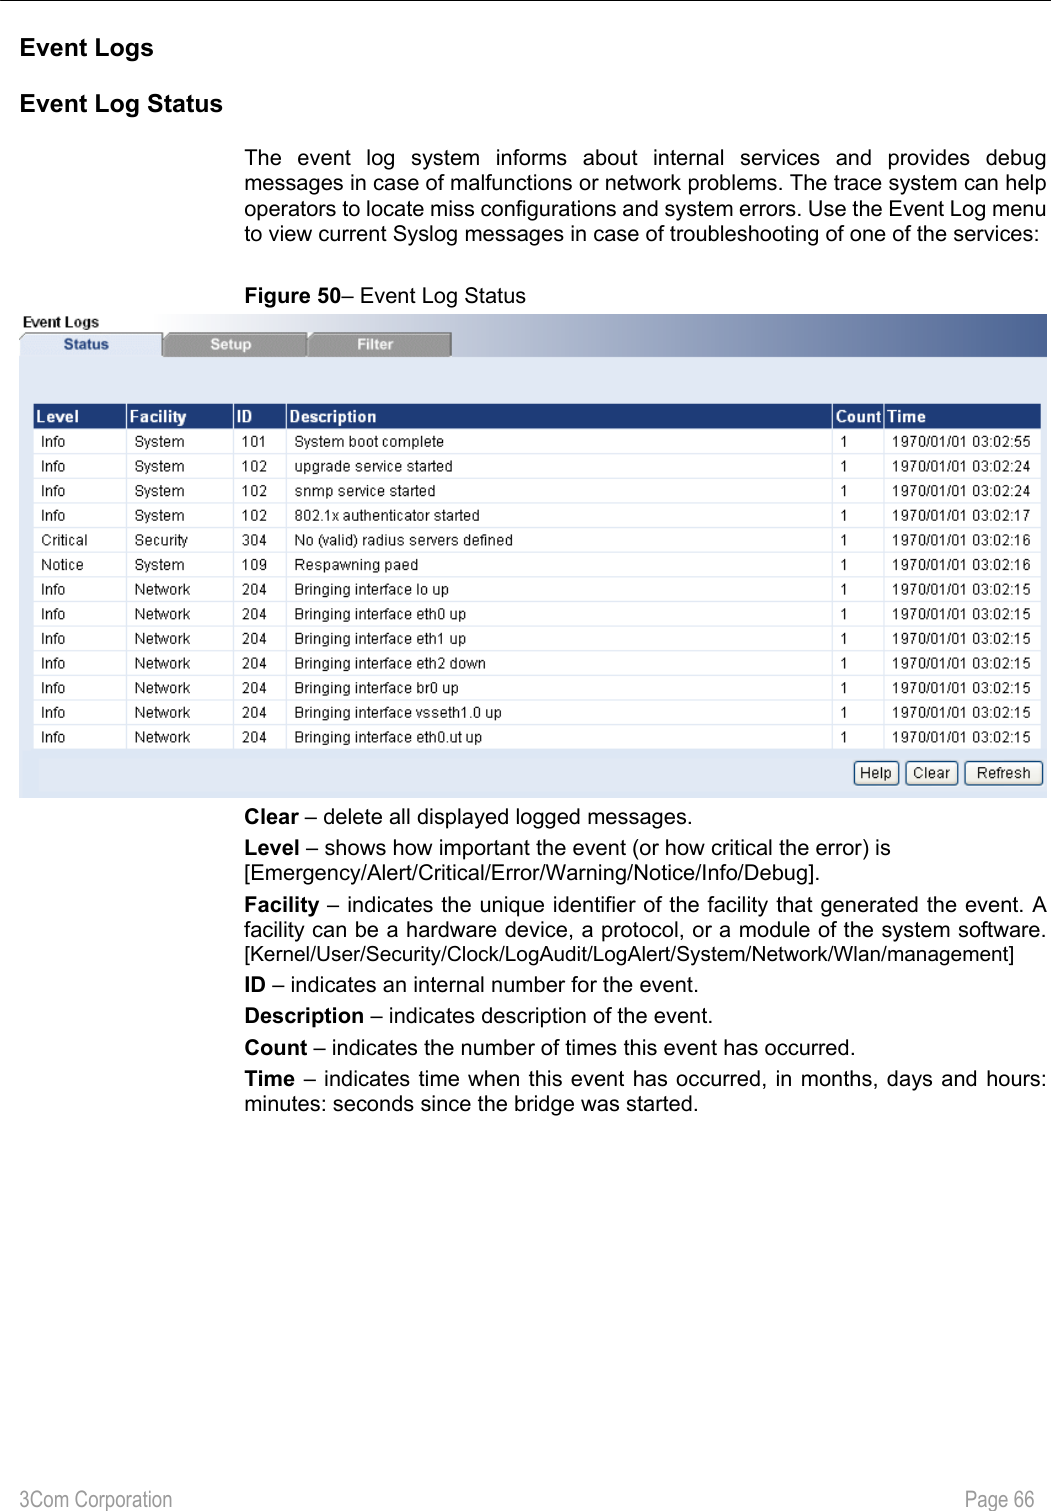 3Com Corporation           Page 66  Event Logs Event Log Status The event log system informs about internal services and provides debug messages in case of malfunctions or network problems. The trace system can help operators to locate miss configurations and system errors. Use the Event Log menu to view current Syslog messages in case of troubleshooting of one of the services:  Figure 50– Event Log Status  Clear – delete all displayed logged messages. Level – shows how important the event (or how critical the error) is [Emergency/Alert/Critical/Error/Warning/Notice/Info/Debug]. Facility – indicates the unique identifier of the facility that generated the event. A facility can be a hardware device, a protocol, or a module of the system software. [Kernel/User/Security/Clock/LogAudit/LogAlert/System/Network/Wlan/management] ID – indicates an internal number for the event. Description – indicates description of the event. Count – indicates the number of times this event has occurred. Time – indicates time when this event has occurred, in months, days and hours: minutes: seconds since the bridge was started.  